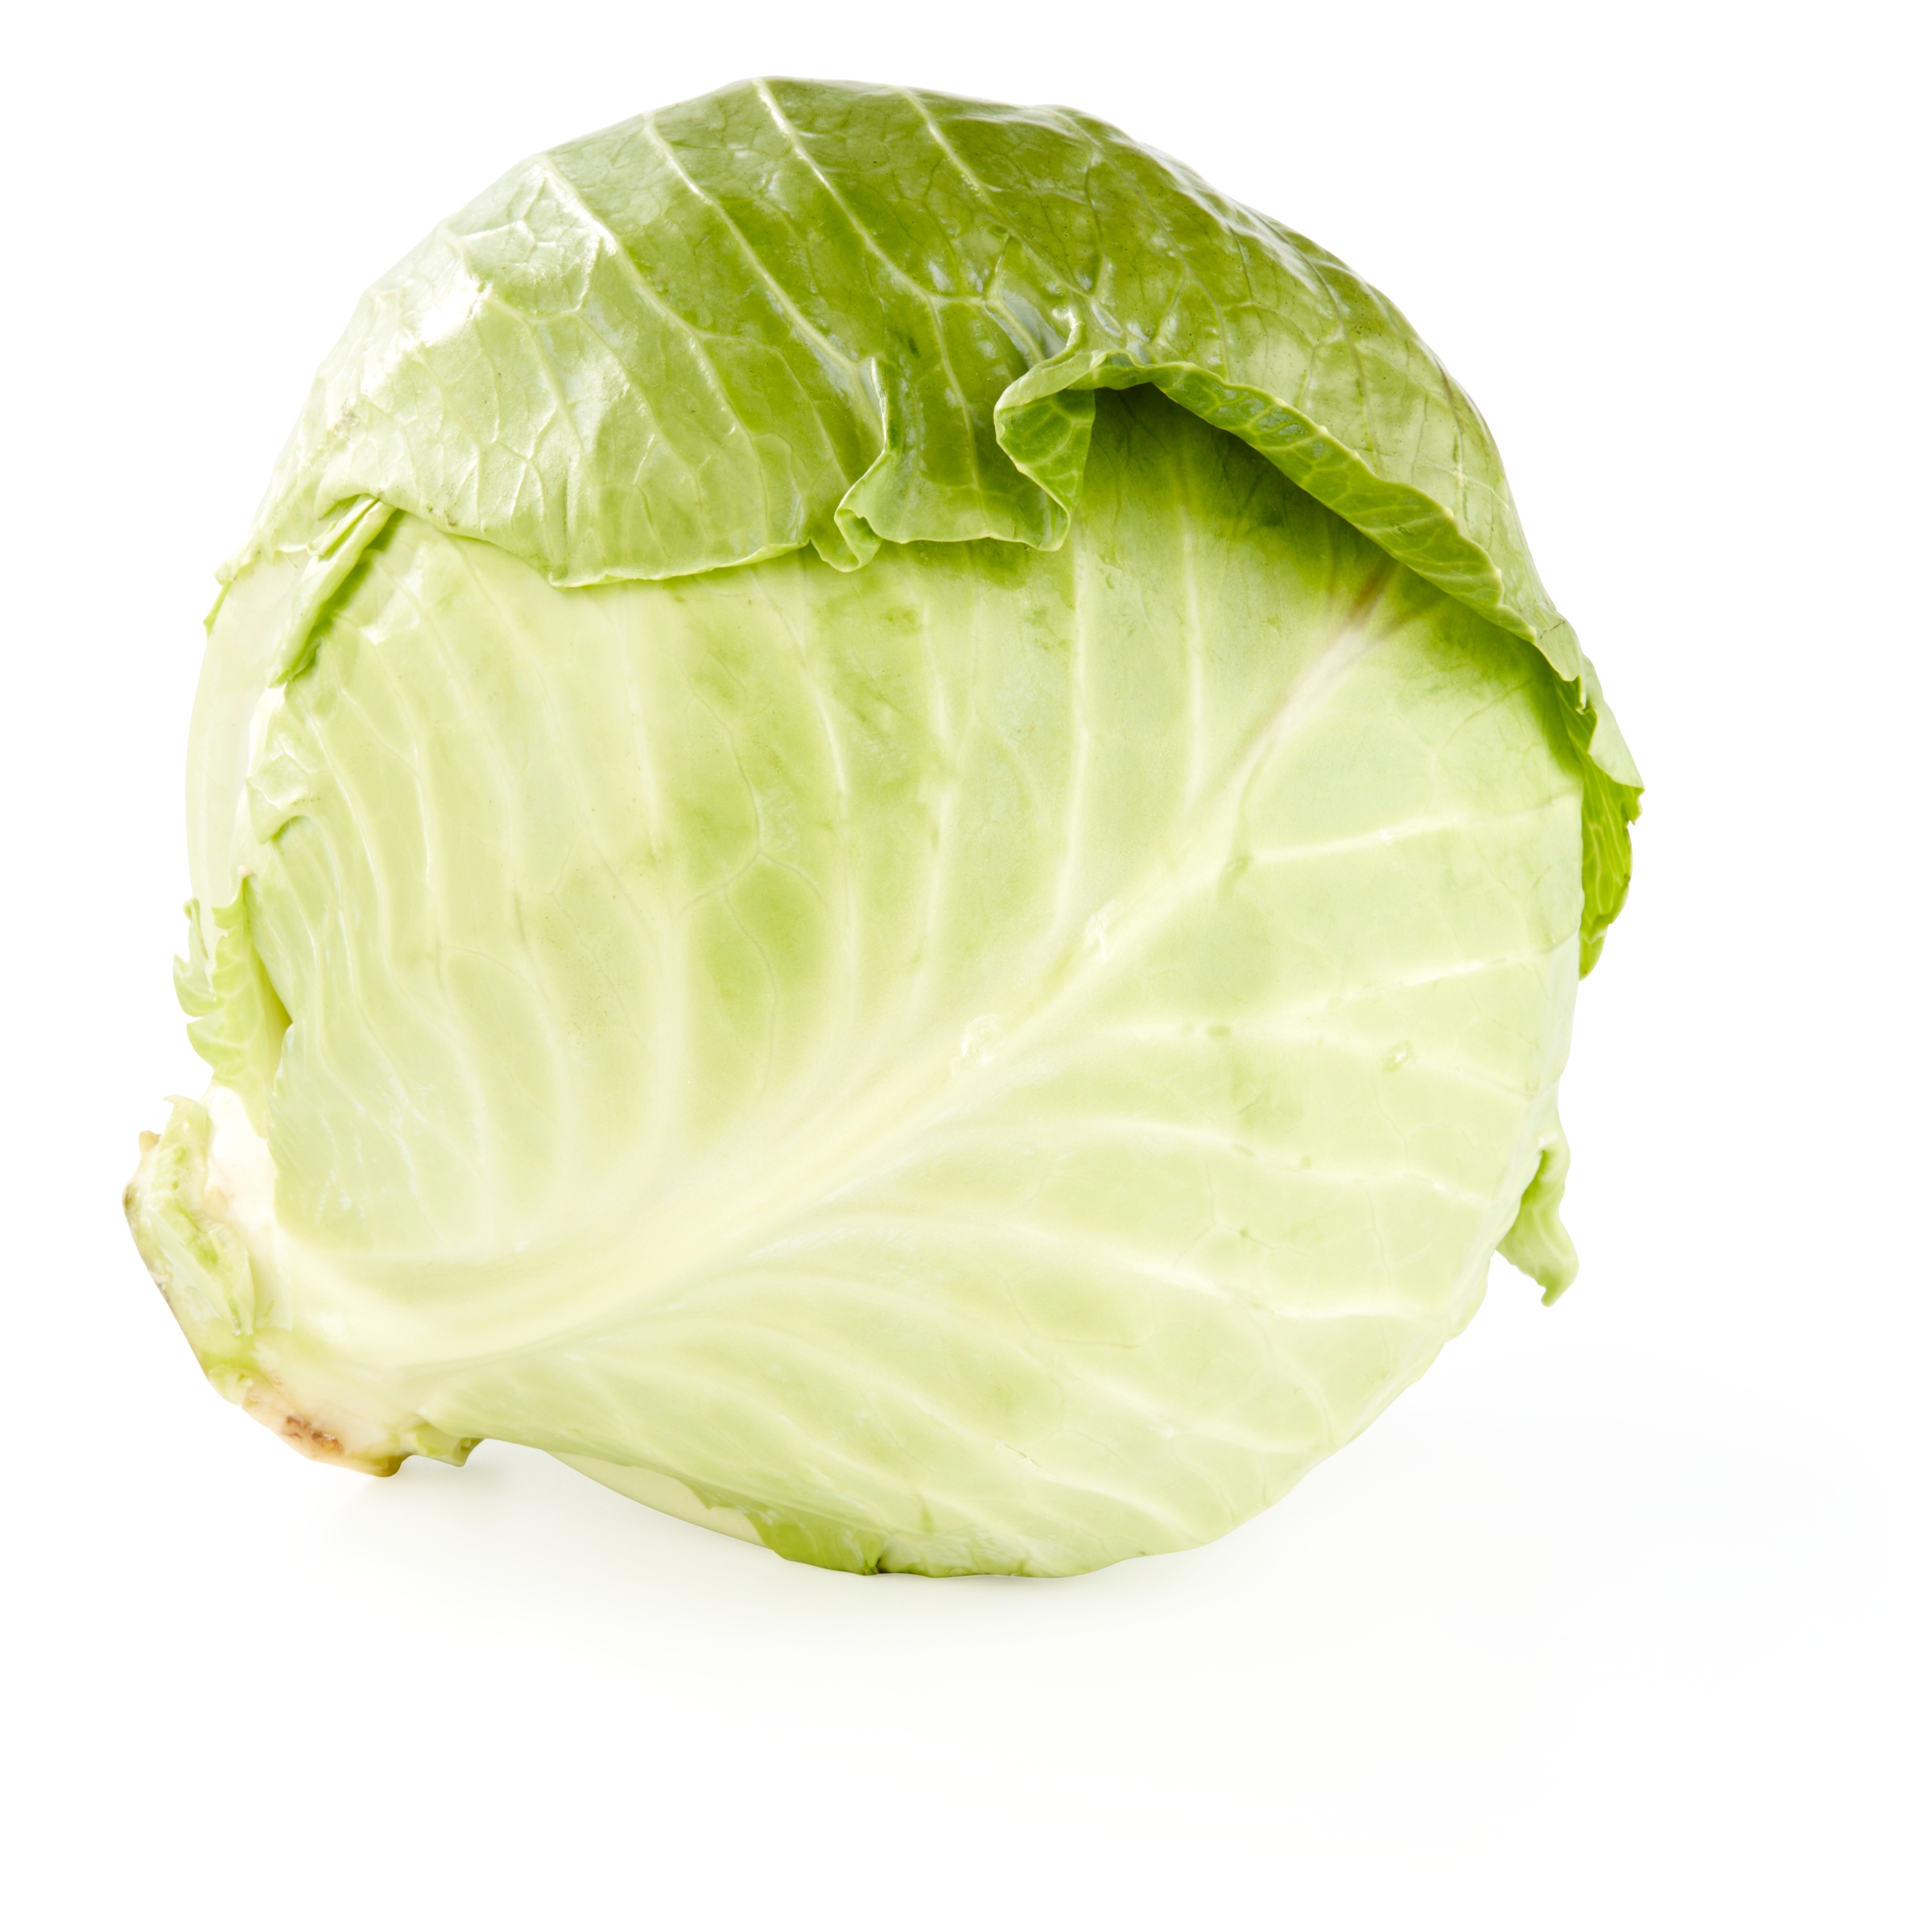 Fresh Green Cabbage, Each - image 1 of 3